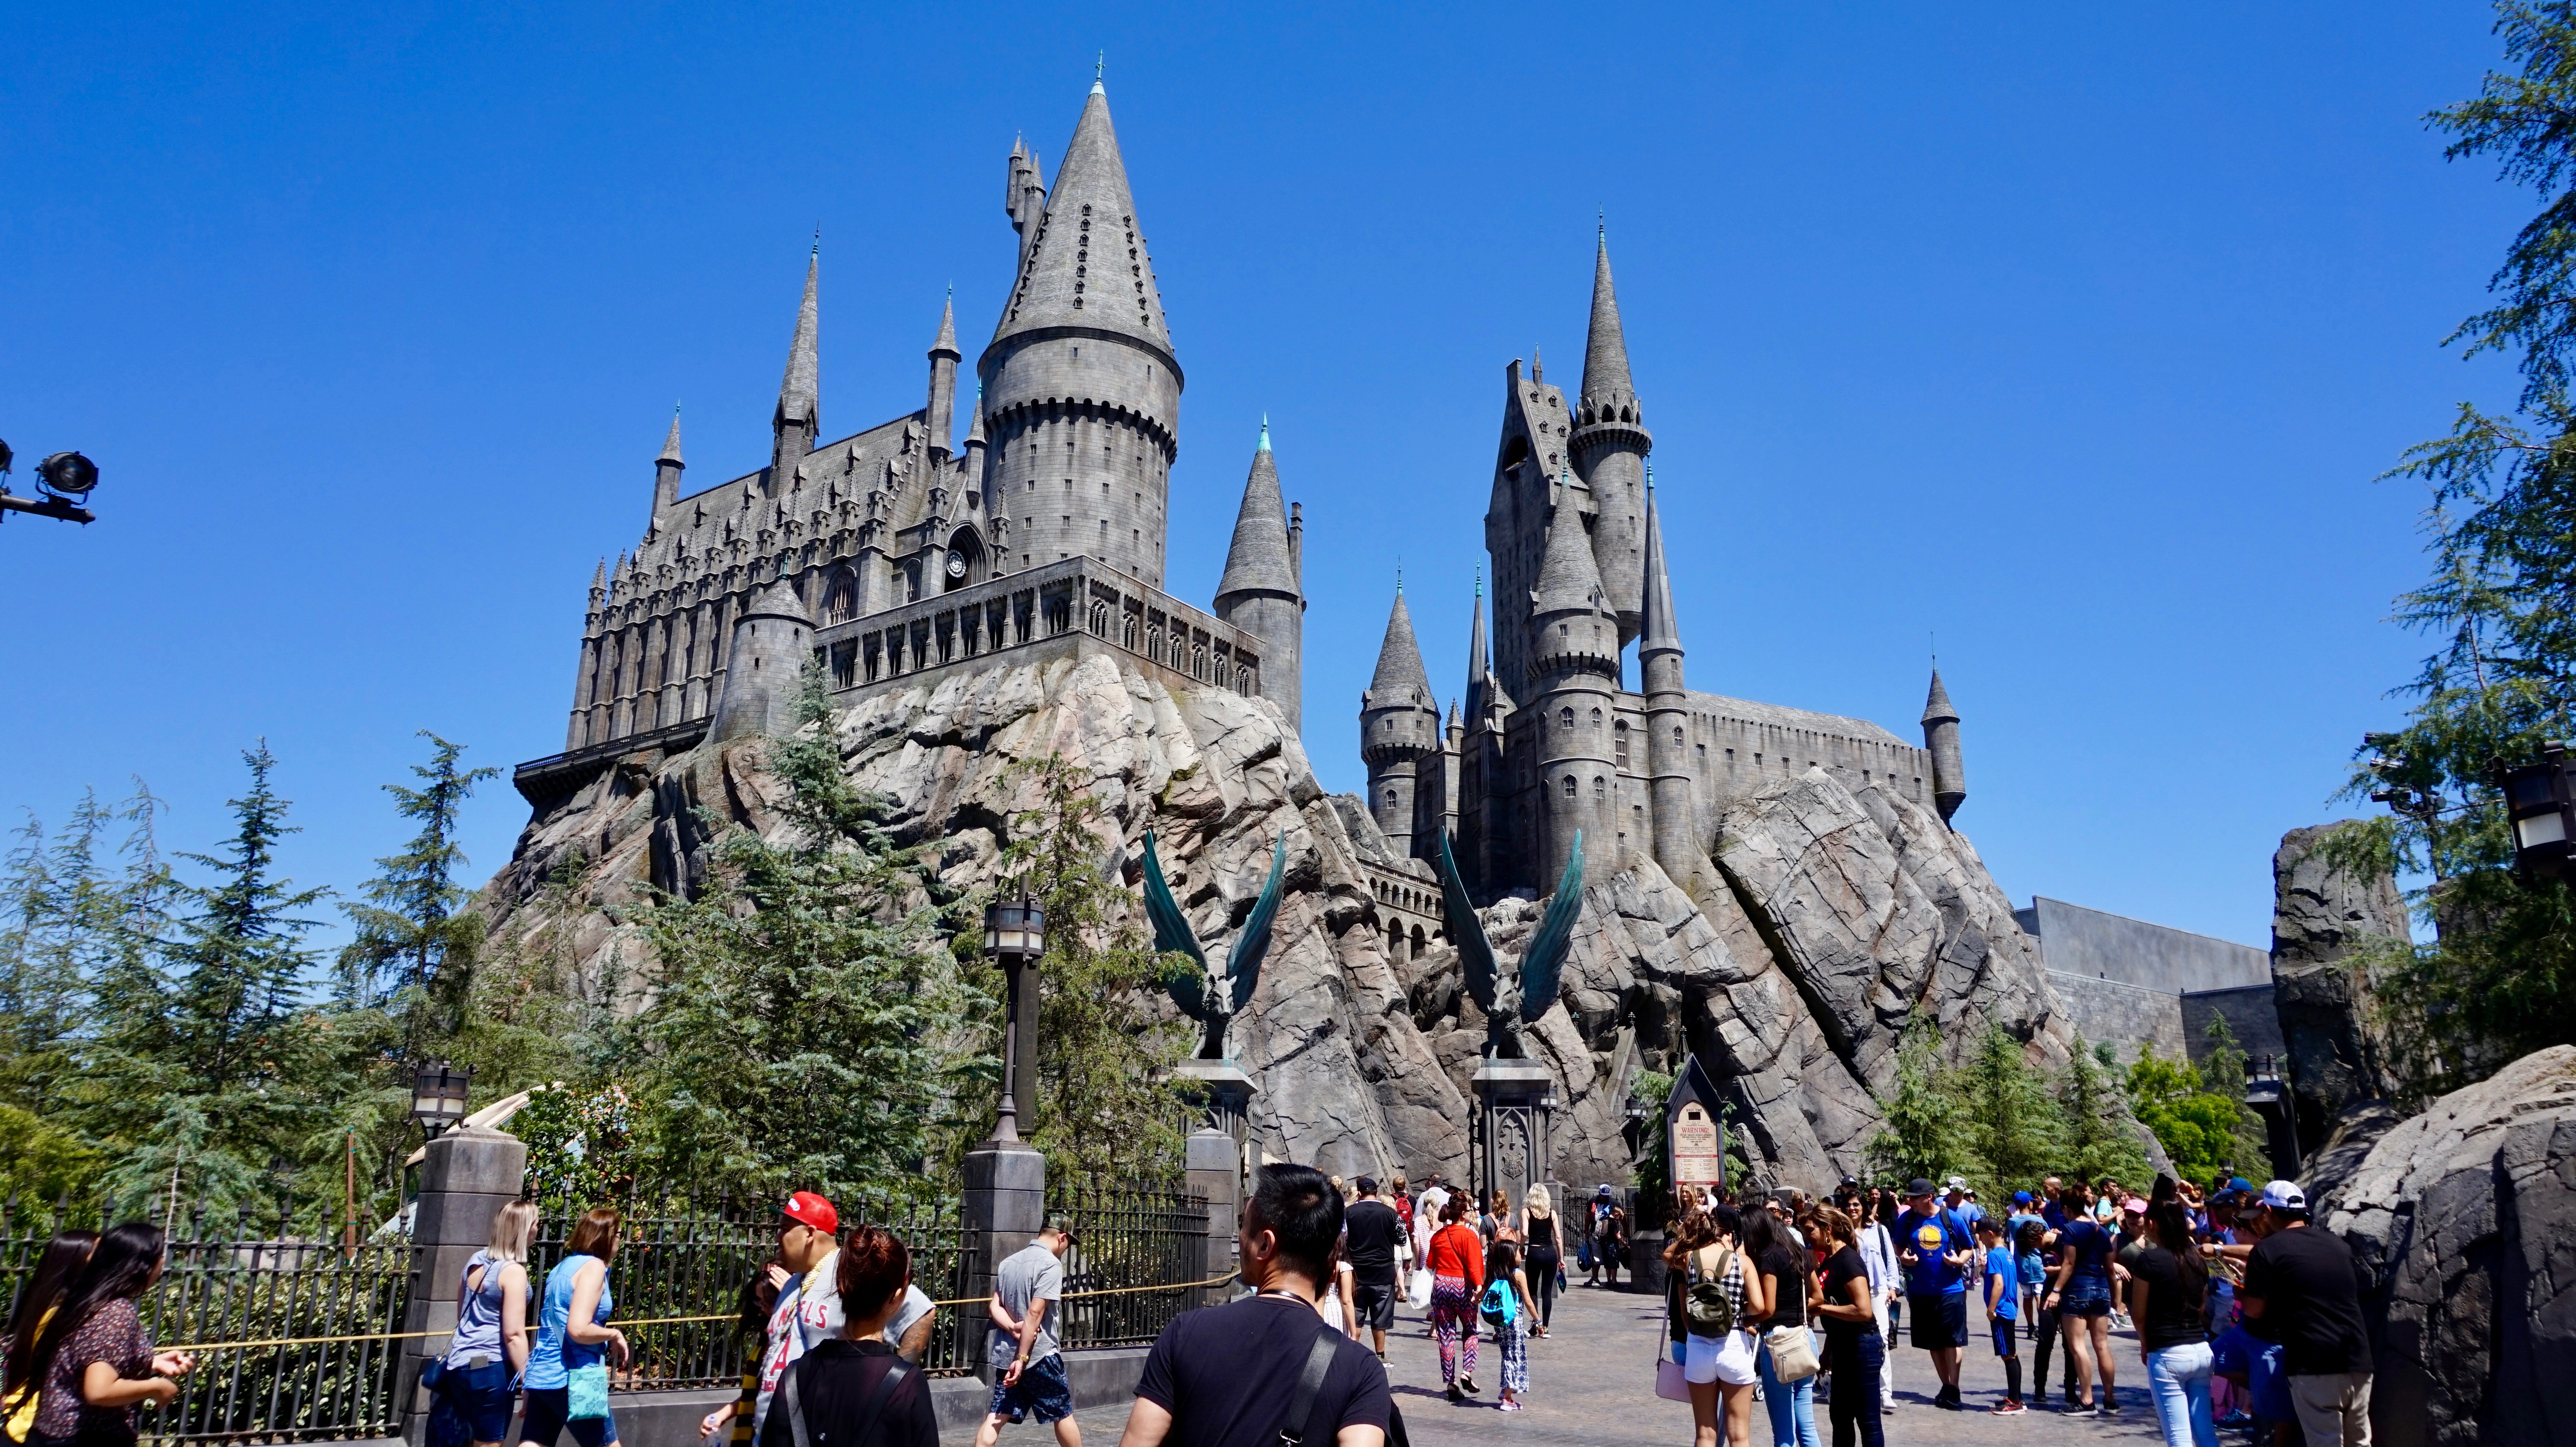 Hogwarts Castle at the Wizarding World of Harry Potter, Universal